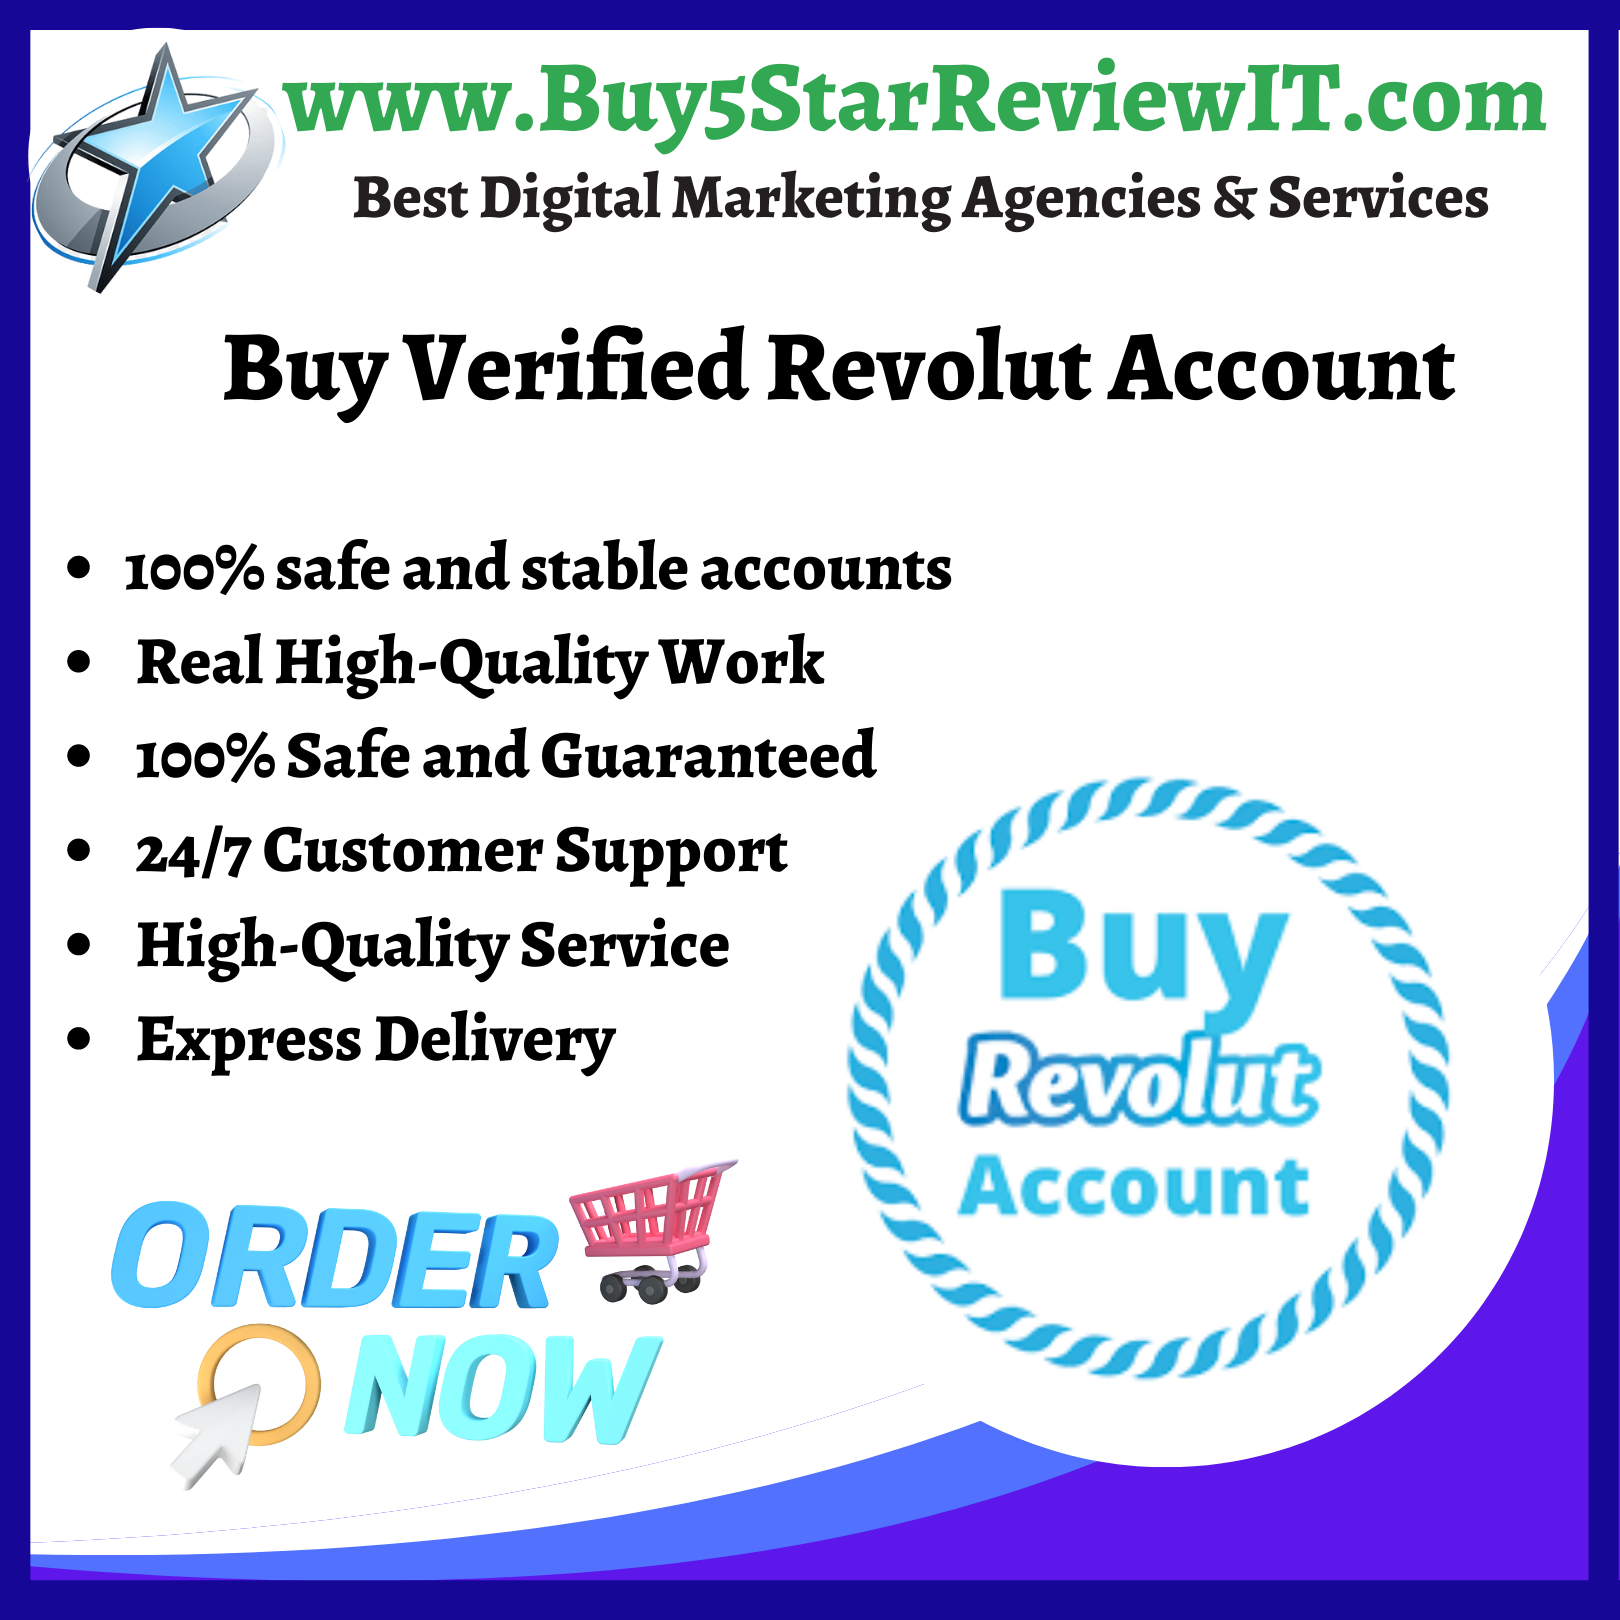 Buy Verified Revolut Account - With All Document & Cheap Price